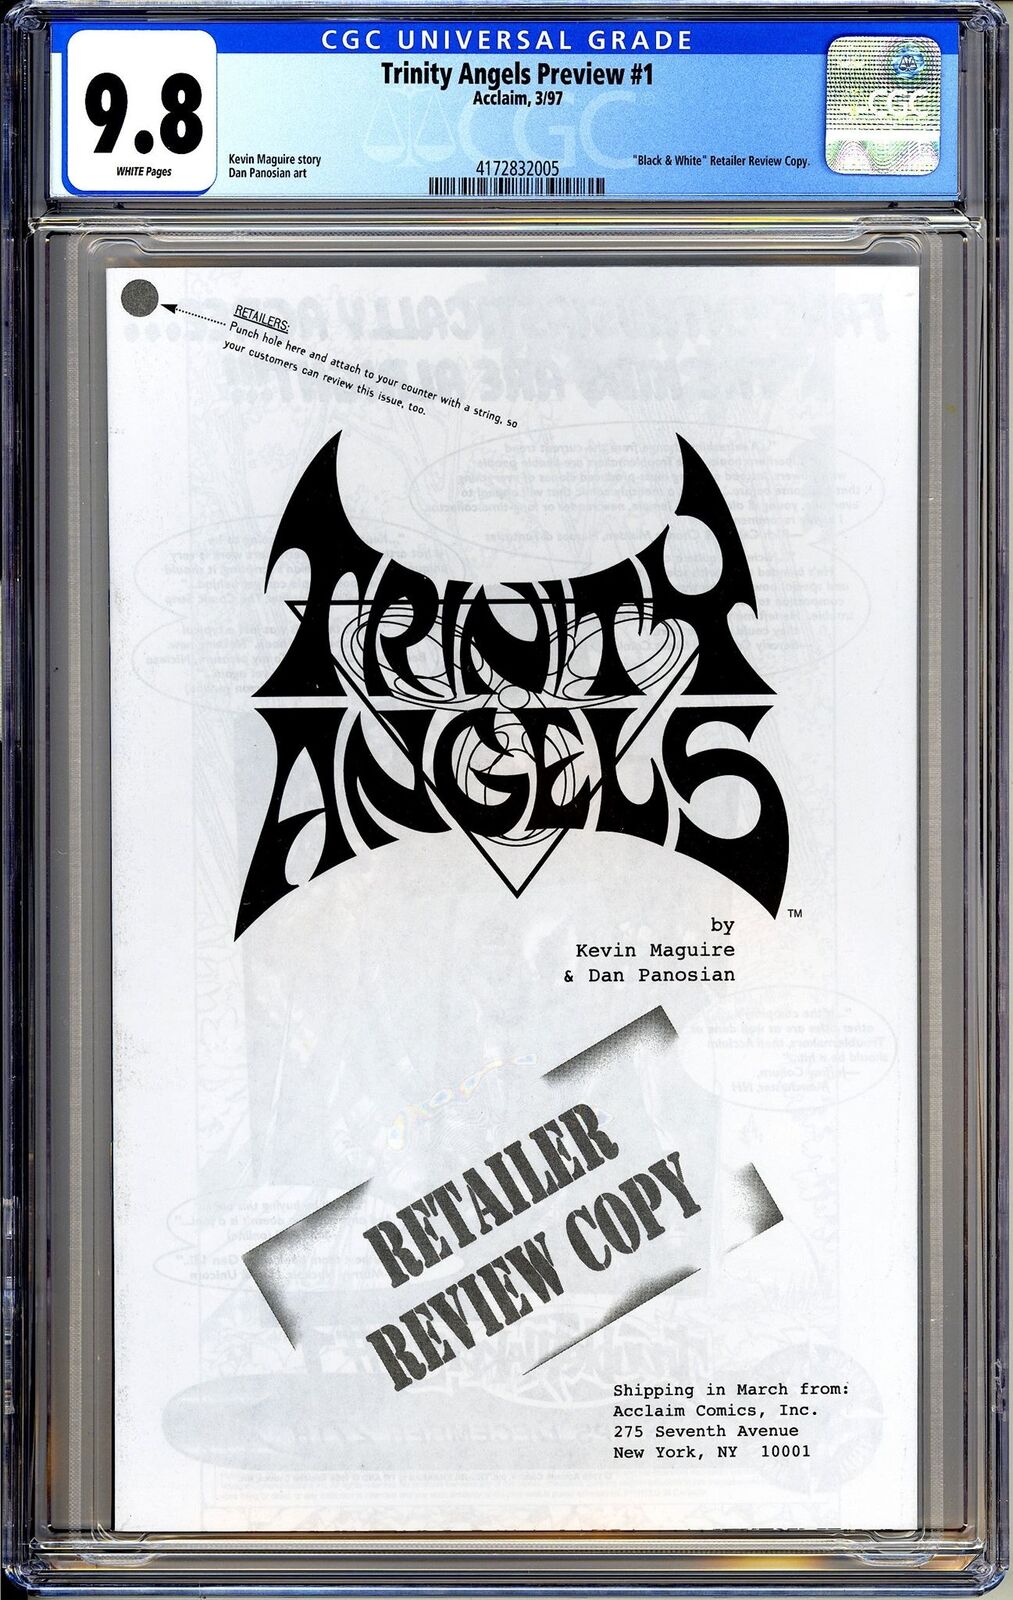 Trinity Angels Preview 1 CGC 9.8 1997 4172832005 Review Black & White Key